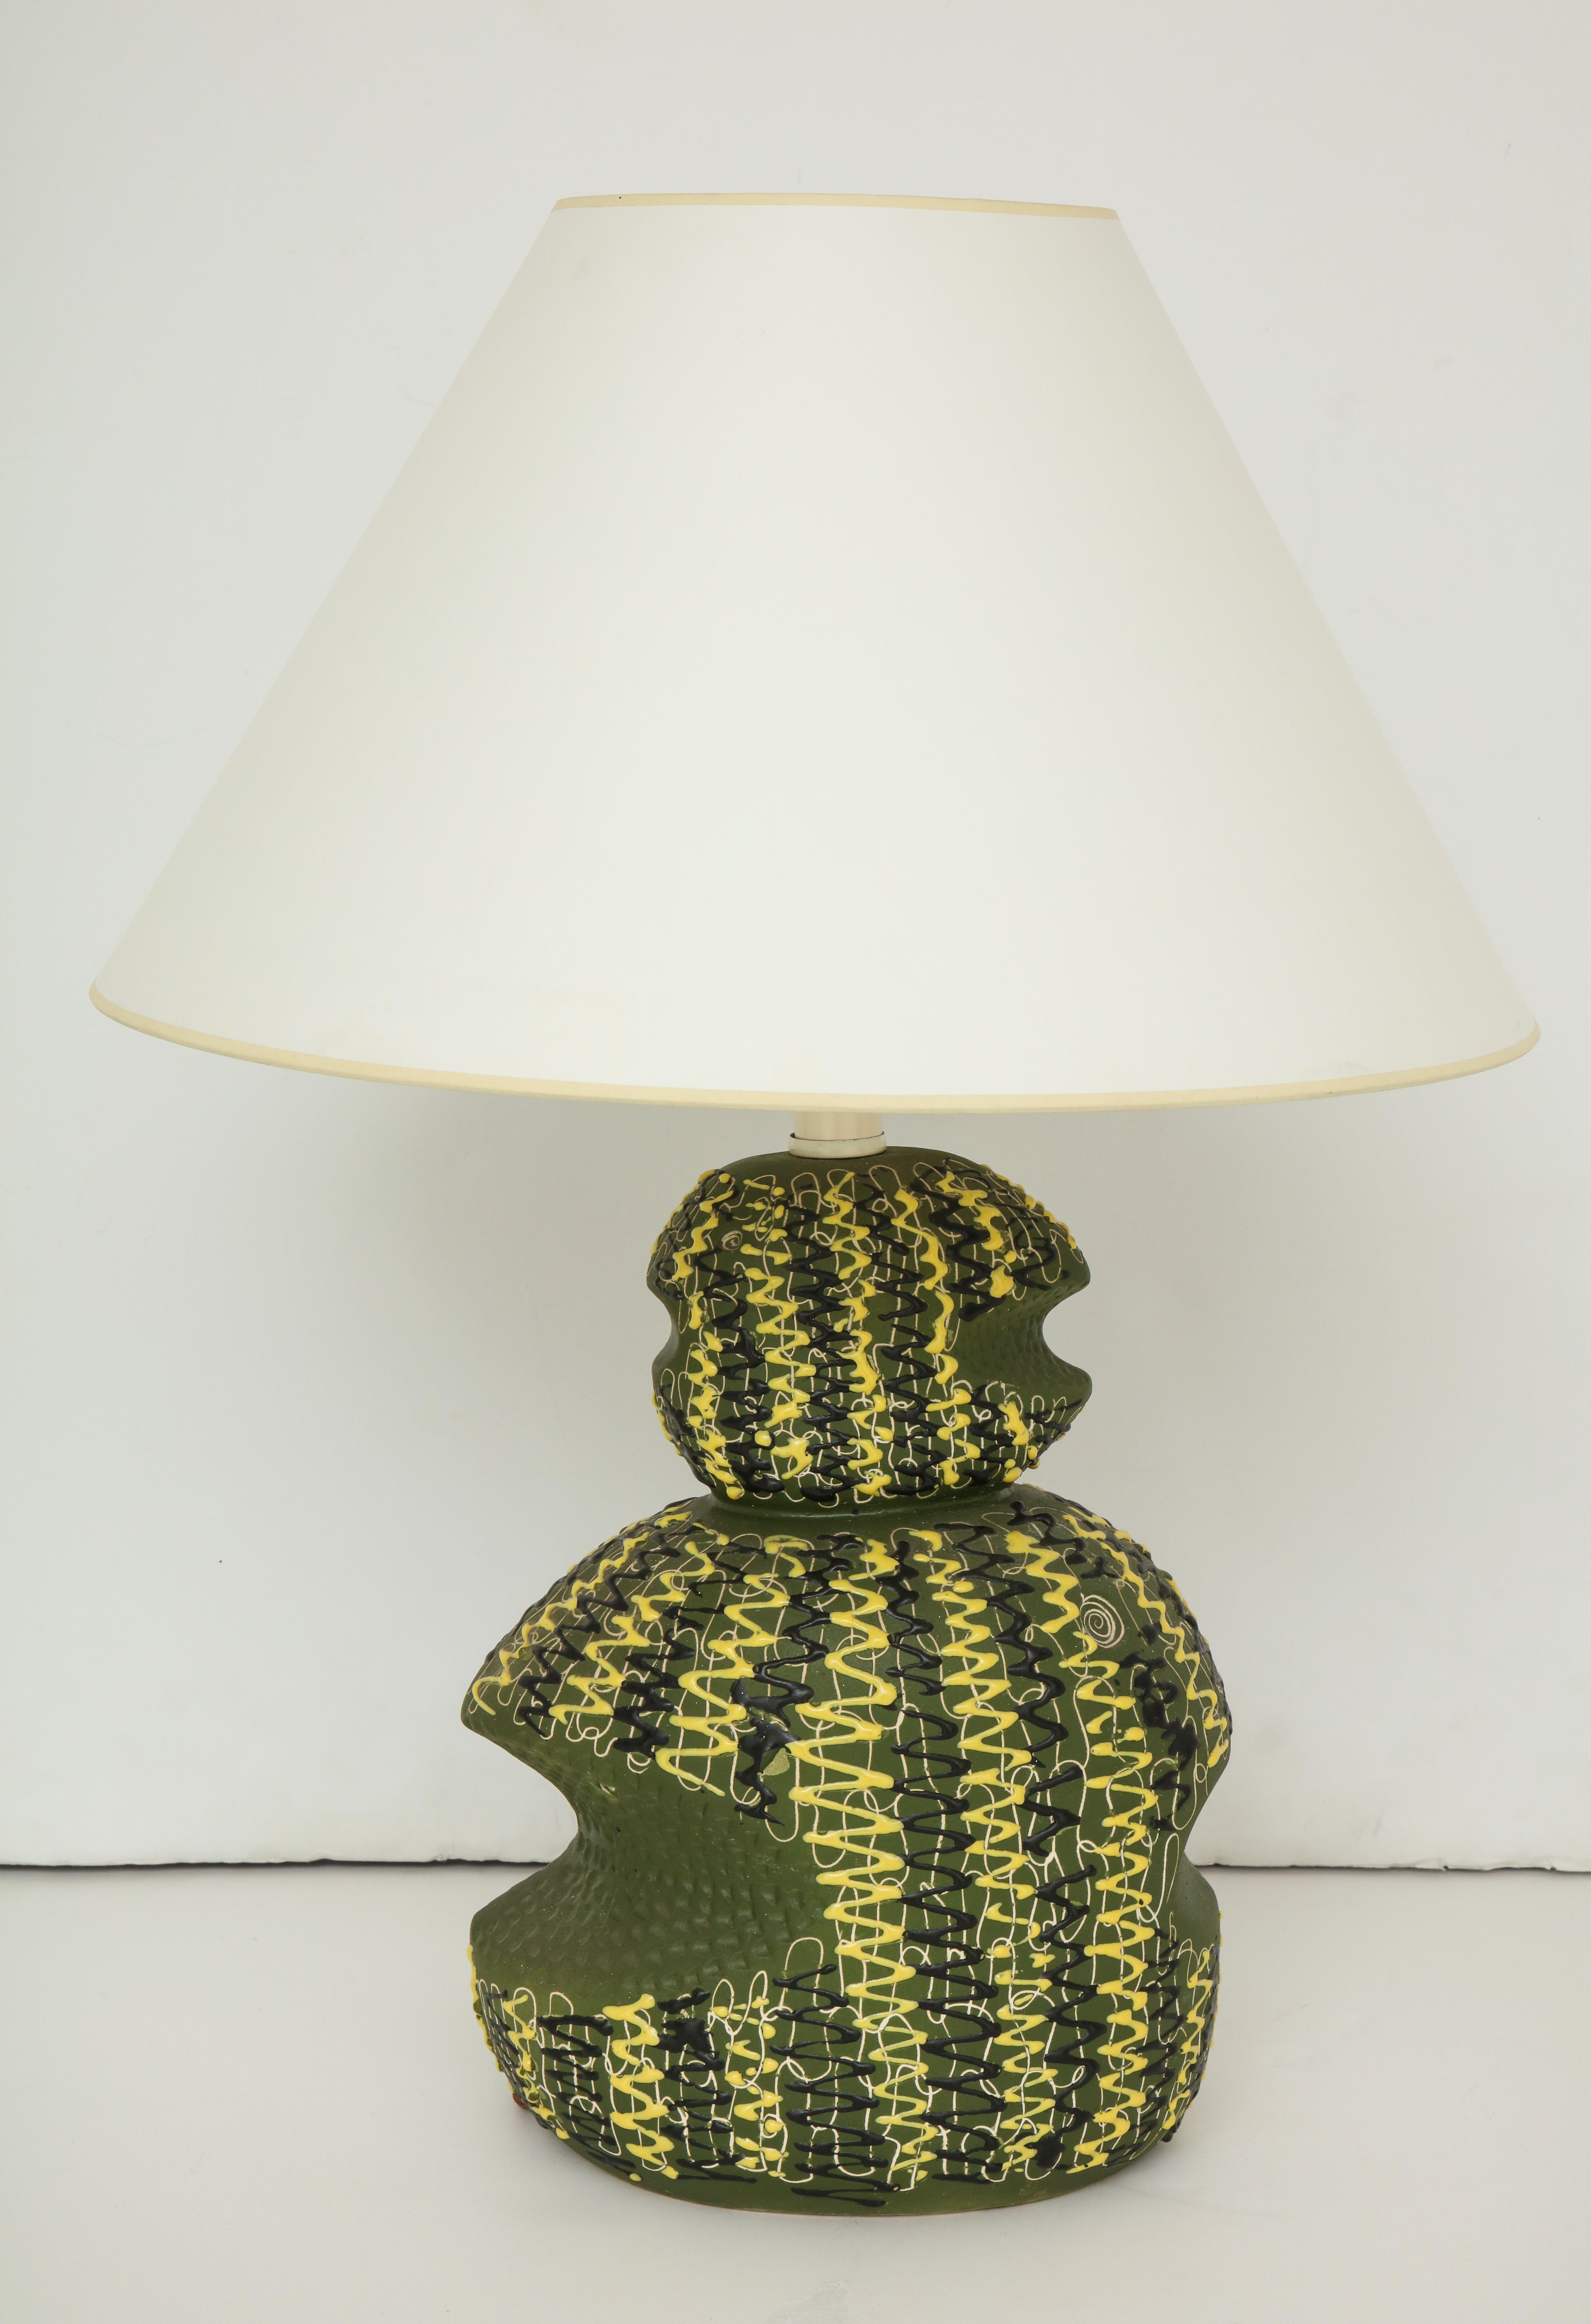 A vintage ceramic table lamp with a textured design in green, yellow and black. Italy, circa 1950. Includes paper shade.

Dimensions:
28 inches total H with shade
14 inches H to socket base / 12 inches H ceramic base only
9 inches L
6 inches